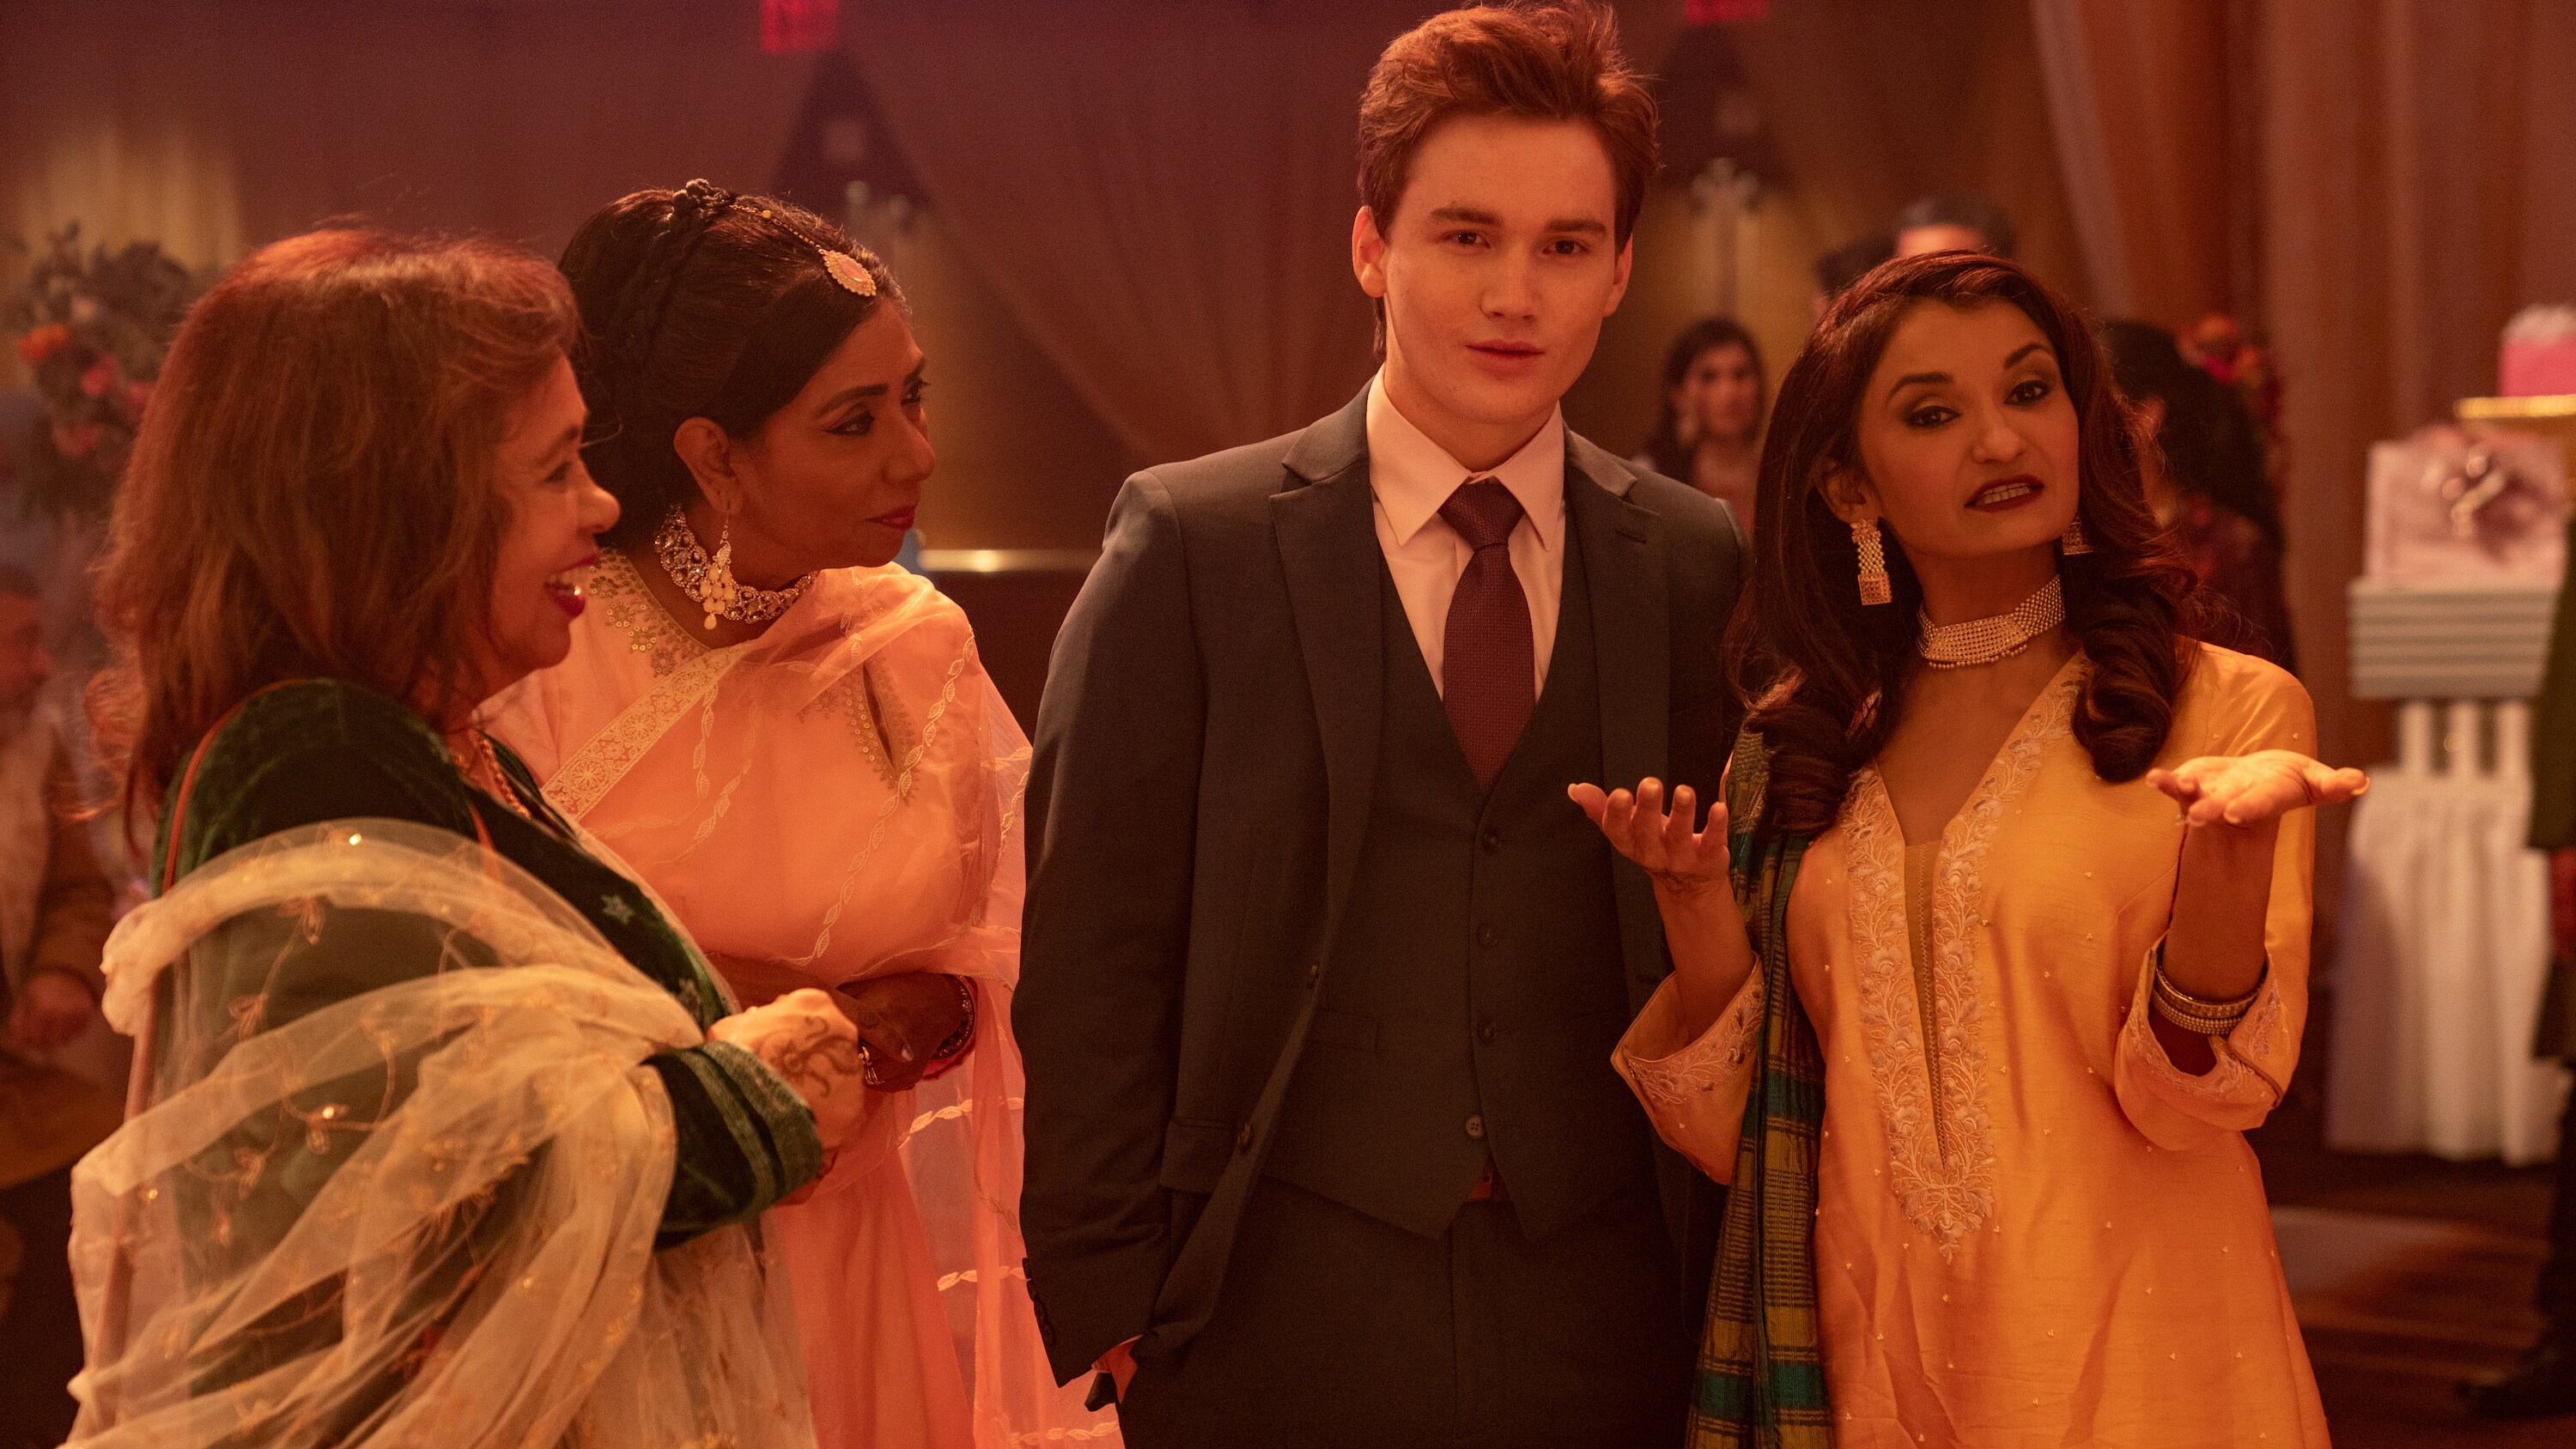 (L-R): Matt Lintz as Bruno and Anjali Bhimani as Auntie Ruby in Marvel Studios' MS. MARVEL. Photo by Daniel McFadden. ©Marvel Studios 2022. All Rights Reserved.